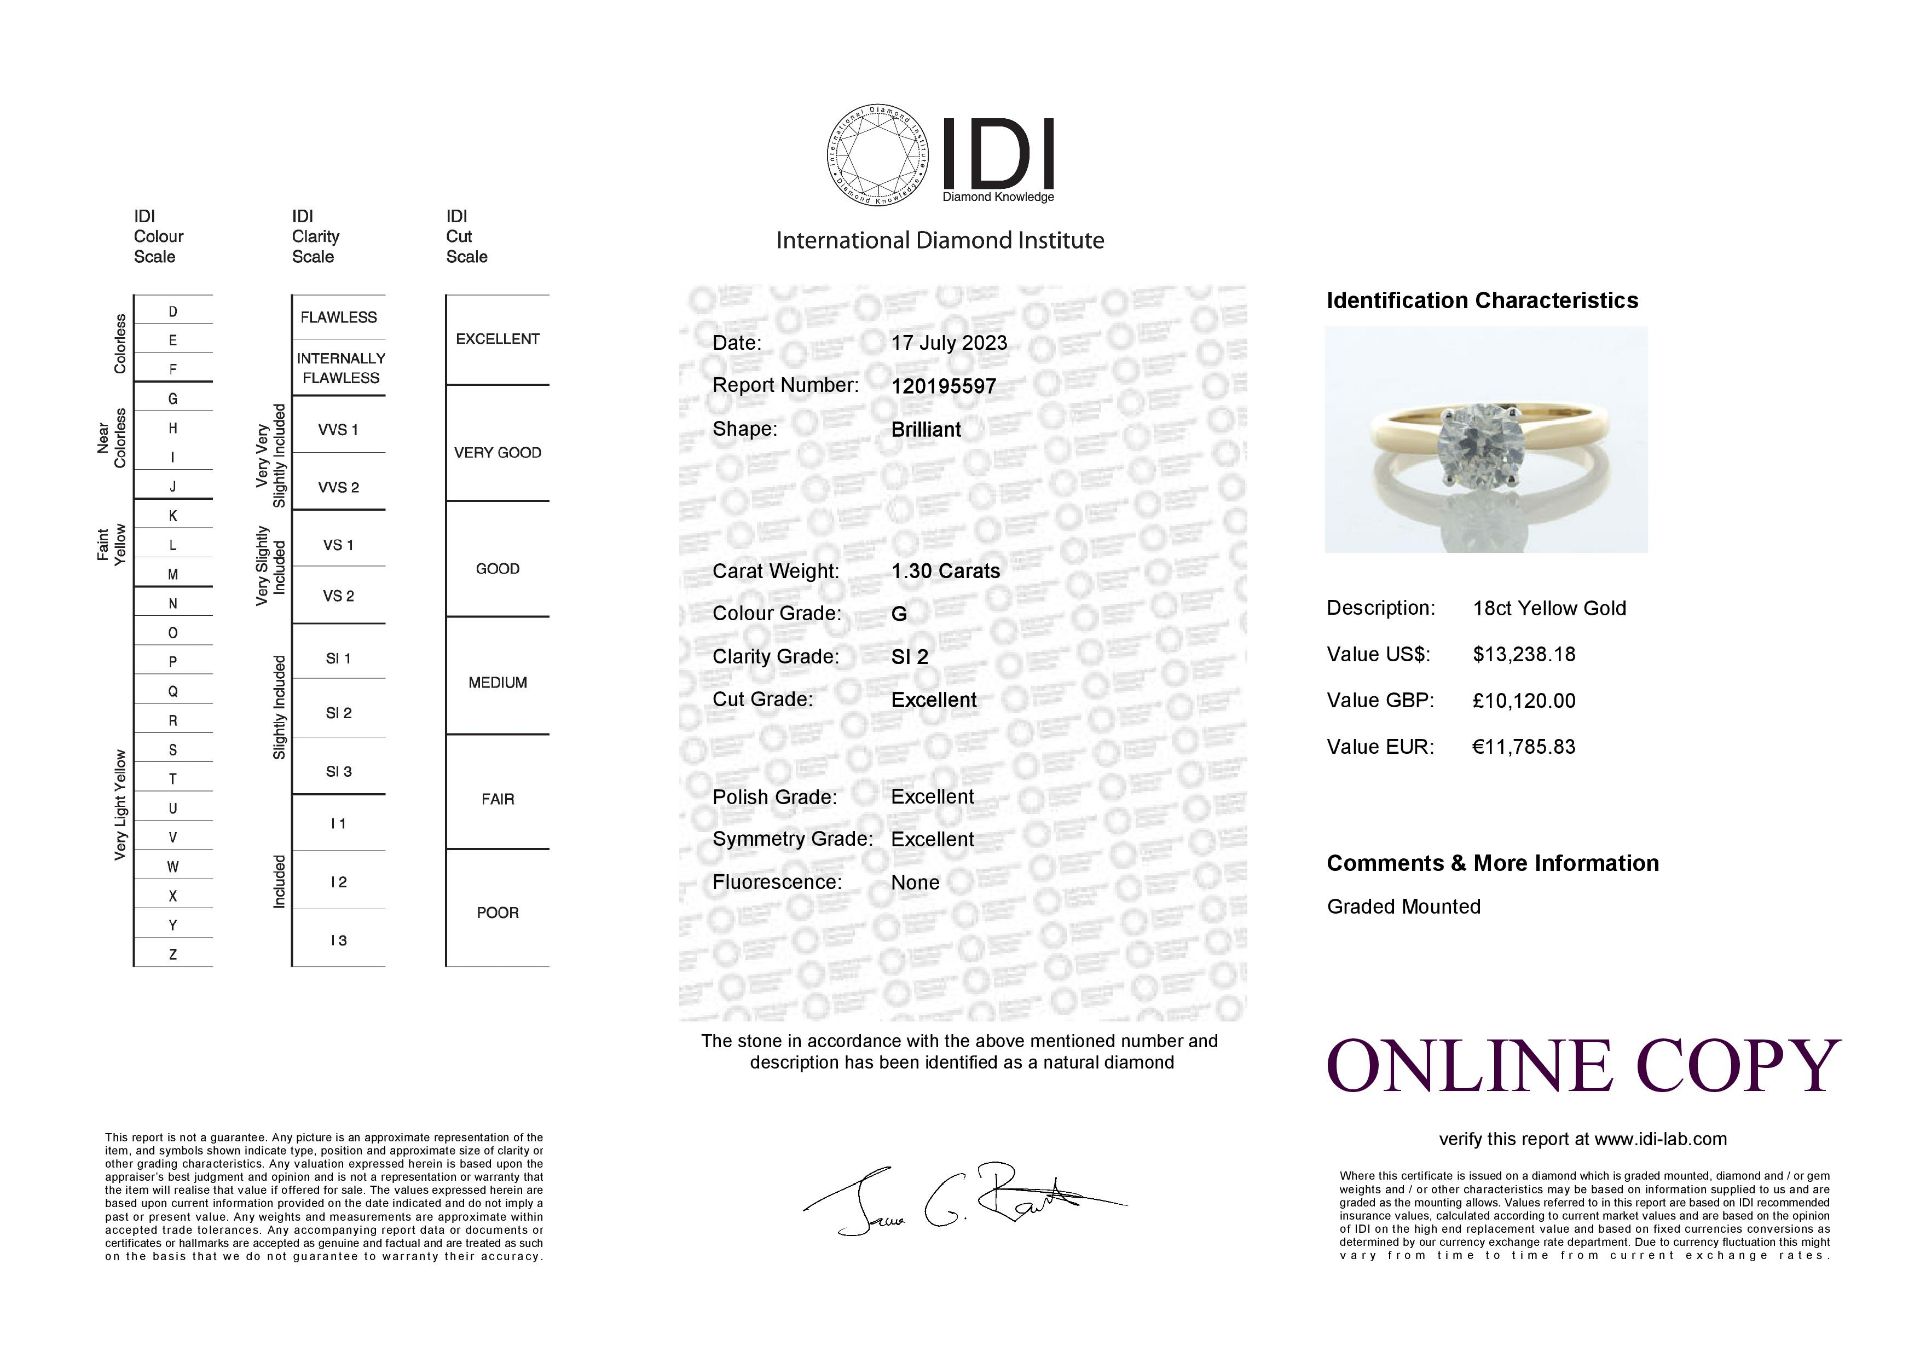 18ct Yellow Gold Single Stone Prong Set Diamond Ring 1.30 Carats - Valued By IDI £10,120.00 - A 1.30 - Image 5 of 5